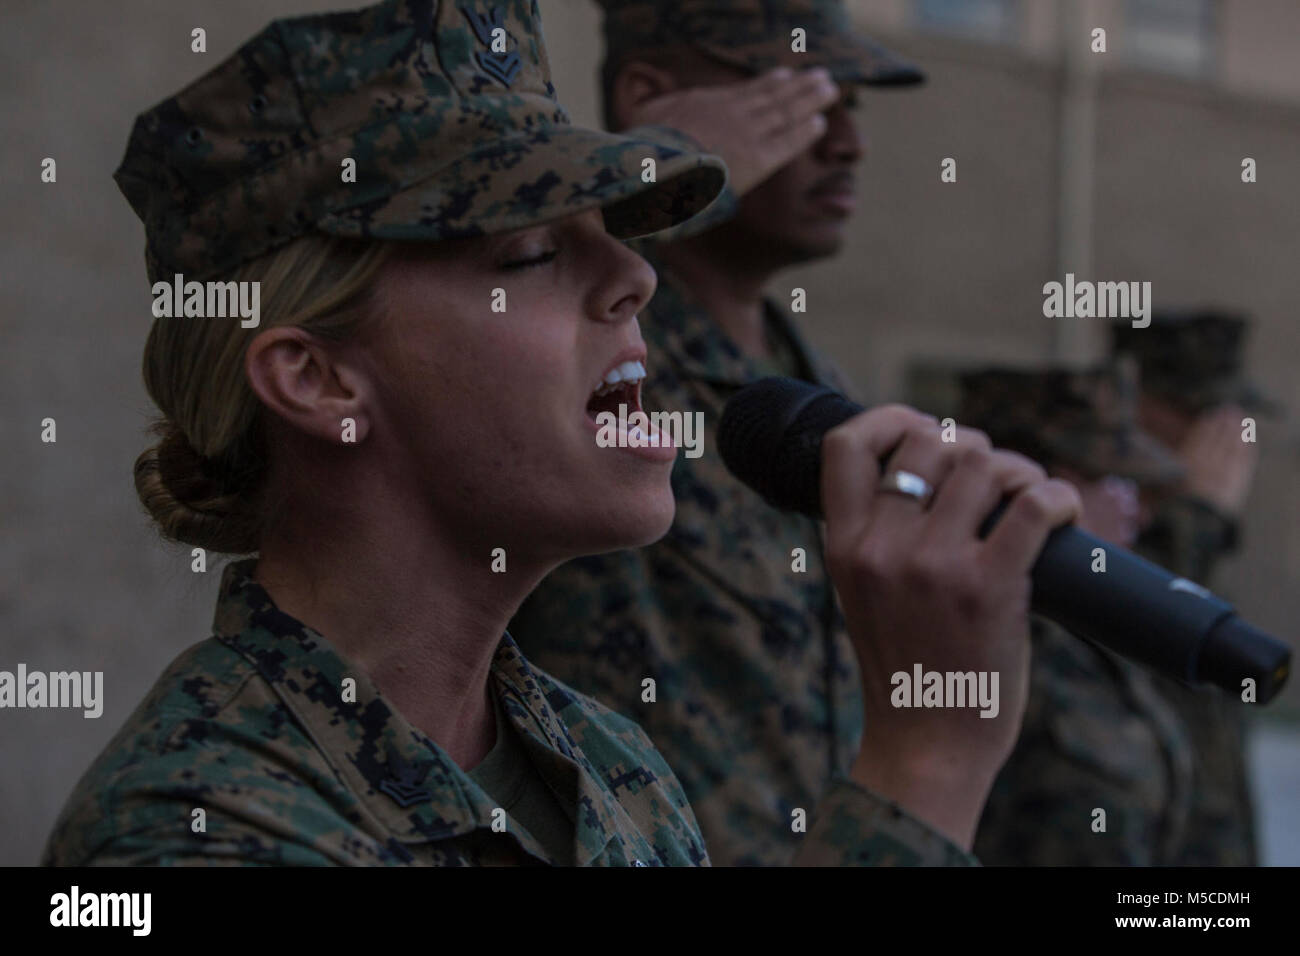 U.S. Navy Petty Officer 2nd Class Ashley Raynor, a hospital corpsman with 1st Marine Logistics Group, sings the National Anthem during the appointment ceremony for Master Chief Petty Officer Zachary Pryor, who will become the command master chief for the 1st MLG, at Camp Pendleton, Calif., Feb. 13, 2018. Pryor was appointed as the command master chief for all medical and dental personnel within the 1st MLG. (U.S. Marine Corps Stock Photo